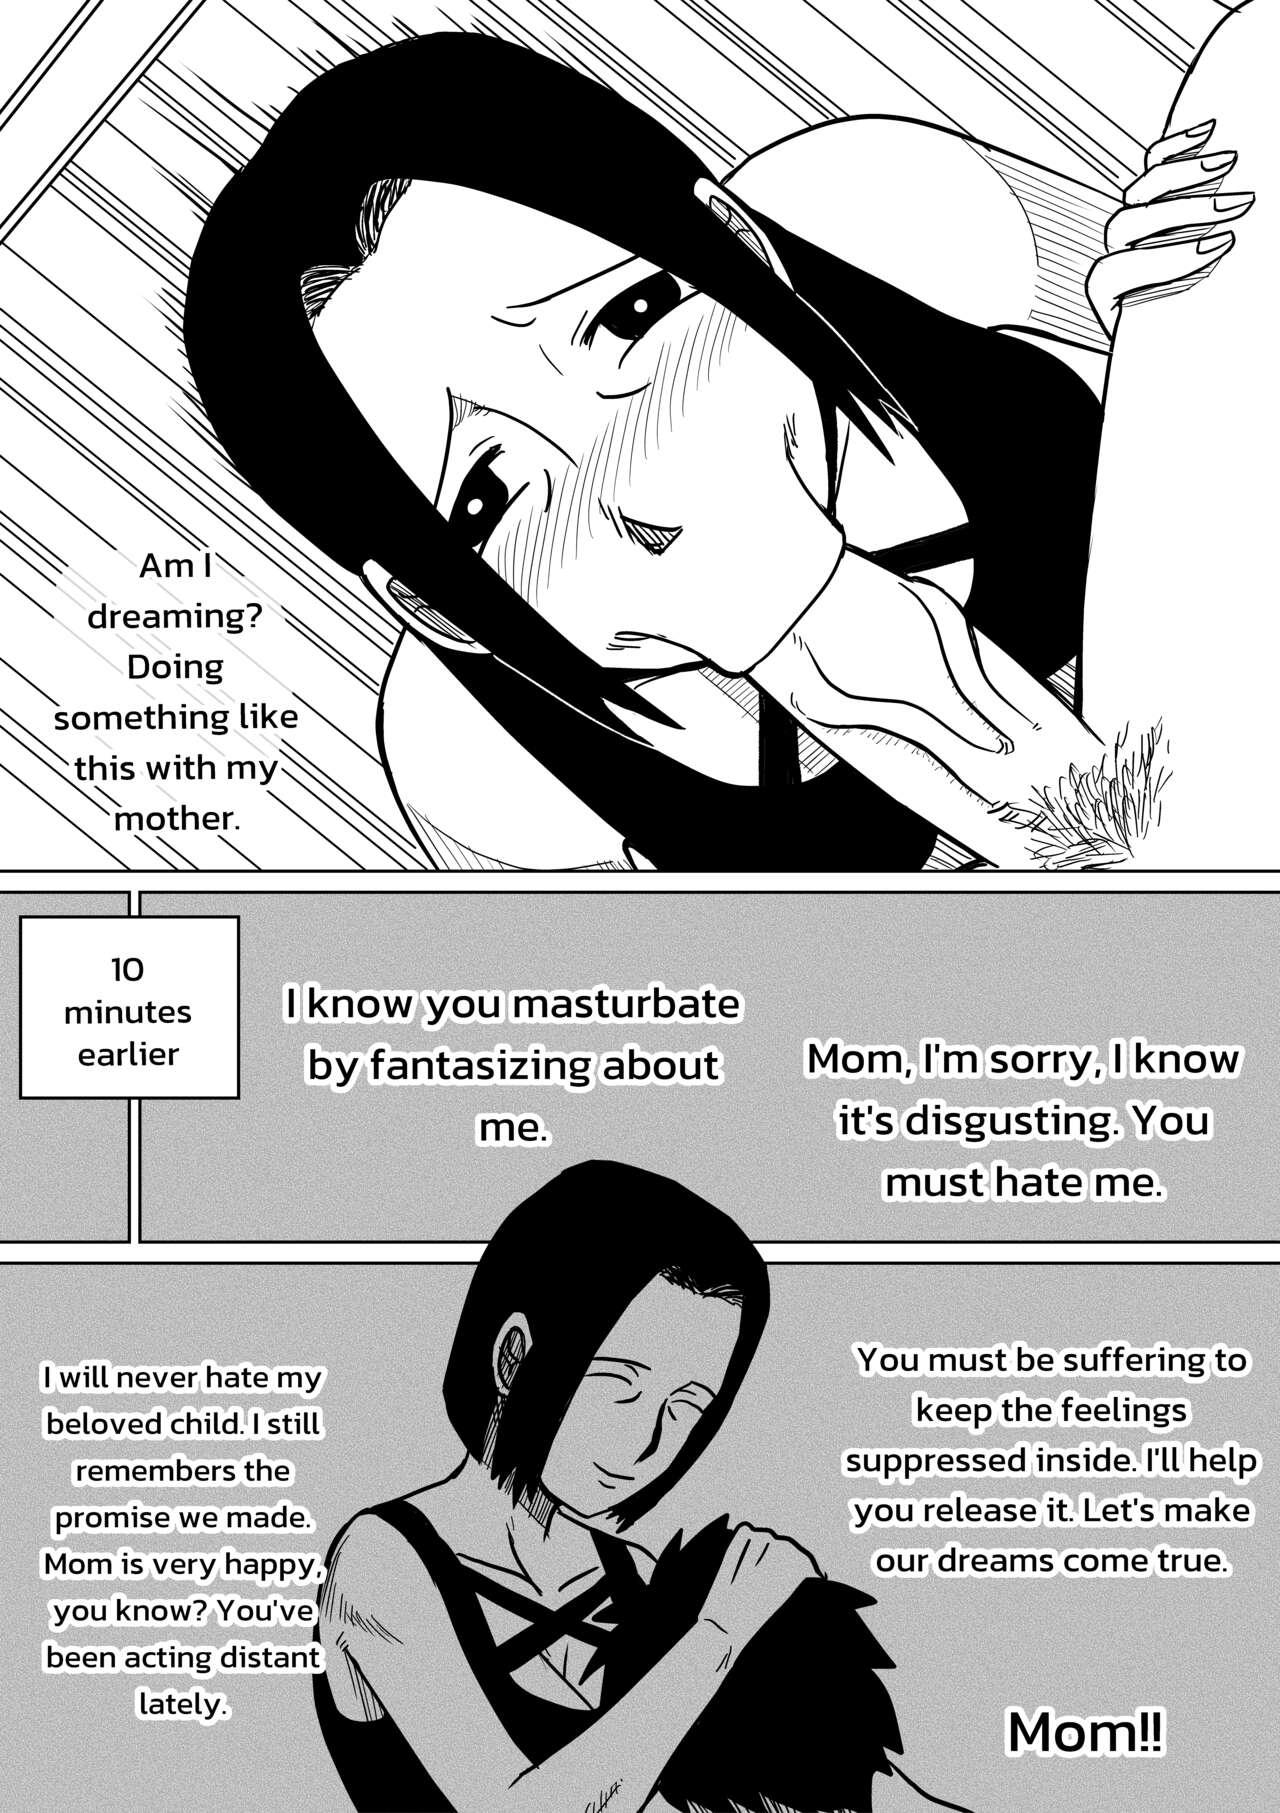 Monster Dick I'm in love with my mother - Prologue - Original Exposed - Page 10